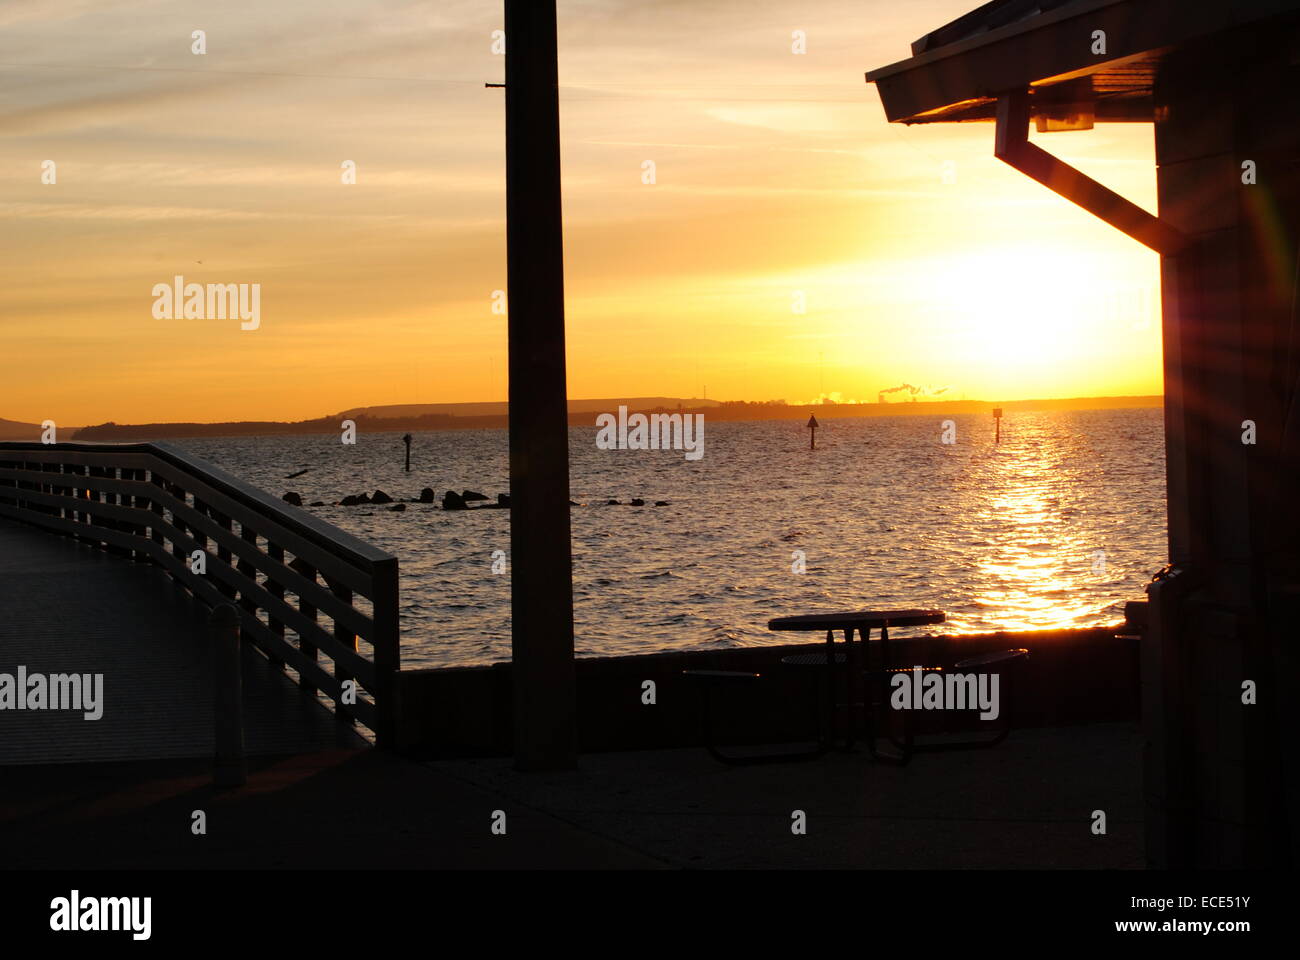 Sunrise,seen at Ballast Point Park,from the Tampa Bay shore line,Florida,U.S.A. Stock Photo